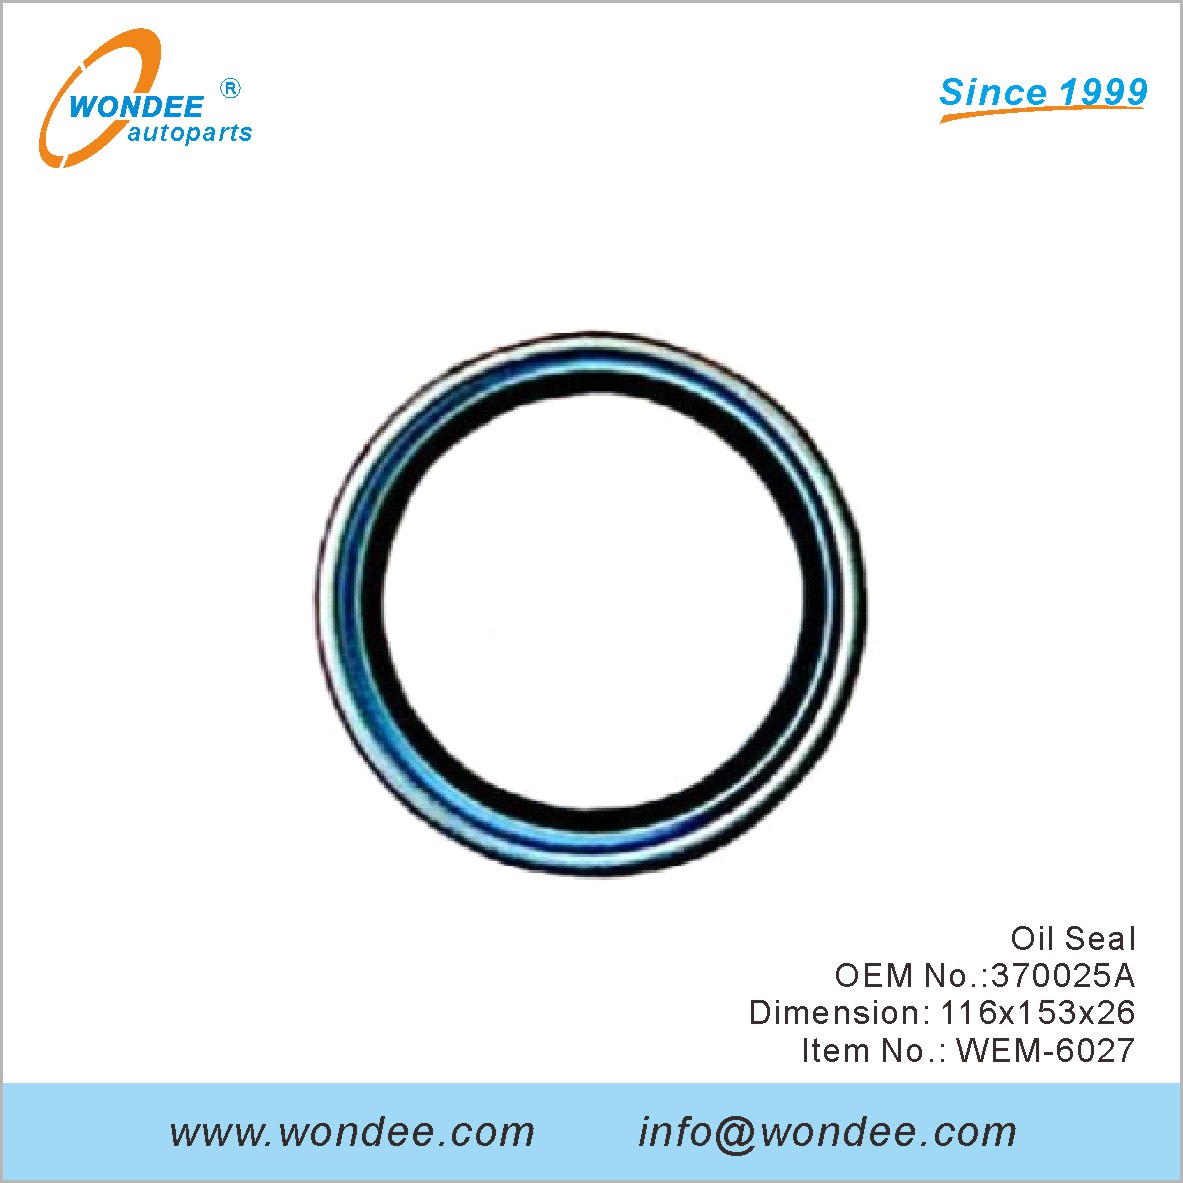 Oil Seal OEM 370025A for engine mouting from WONDEE